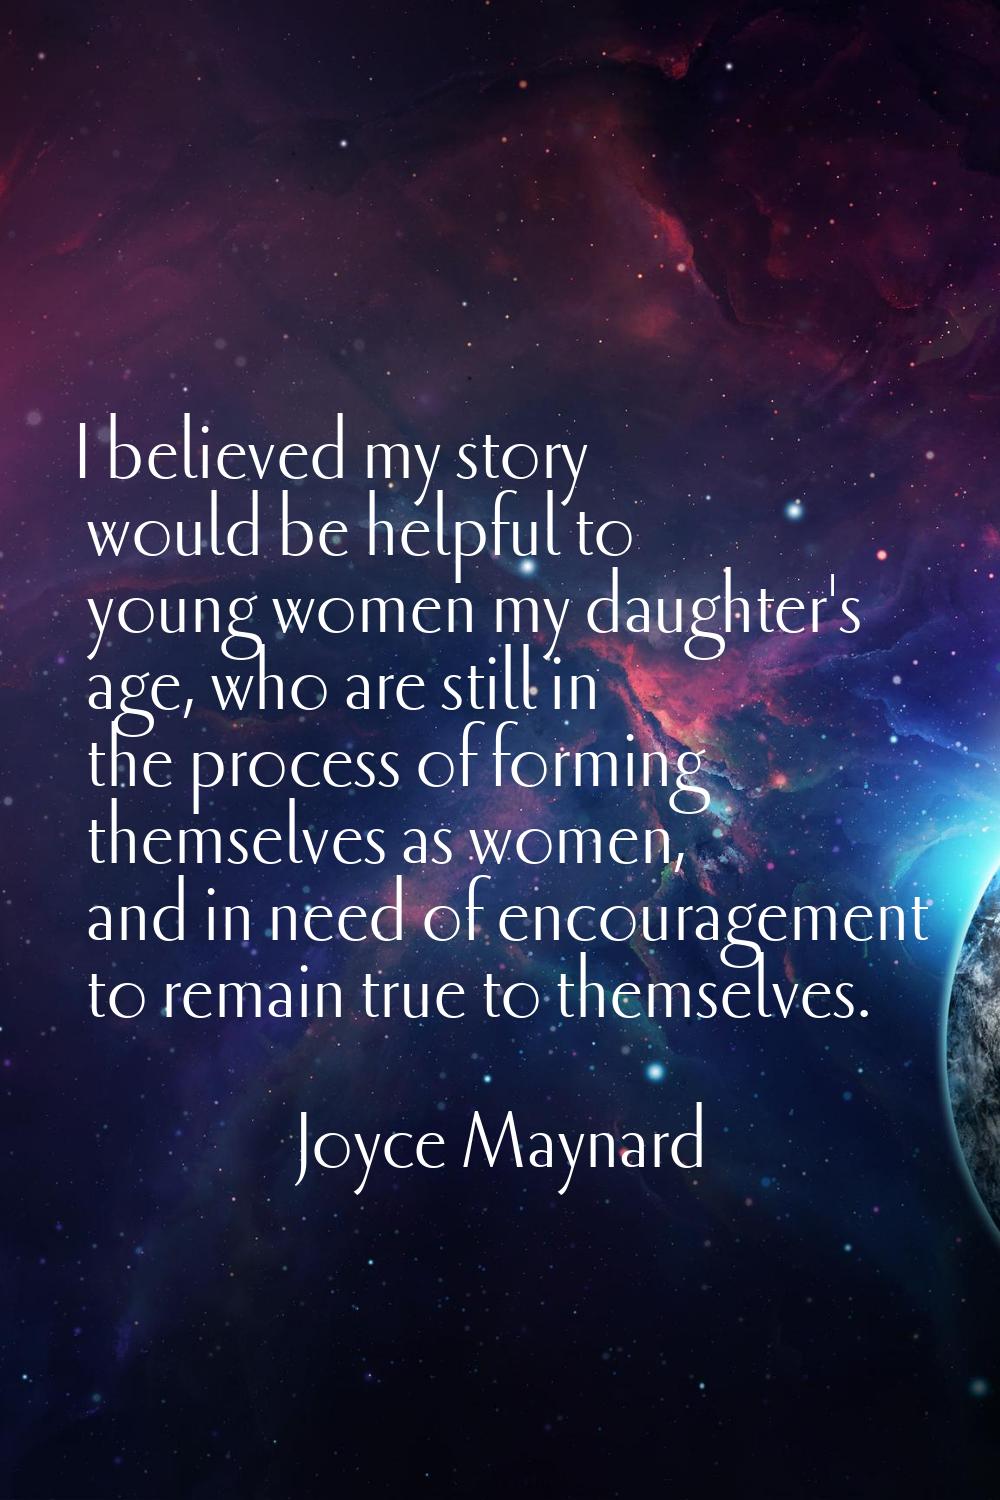 I believed my story would be helpful to young women my daughter's age, who are still in the process